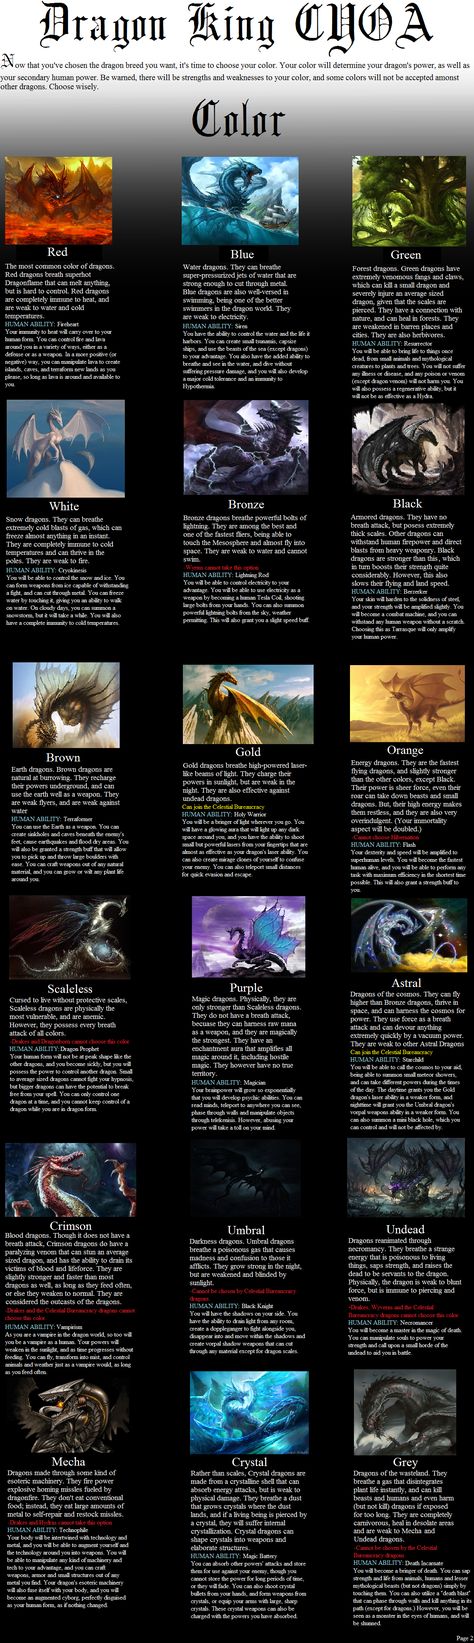 Dragon King CYOA (from /tg/) - Album on Imgur Dragon Types Mythical Creatures, Different Type Of Dragons, Different Dragons Types, All Types Of Dragons, Types Of Dragons Elements, Types Of Dragons Mythical Creatures, Armor For Dragons, Different Dragon Types, Type Of Dragons